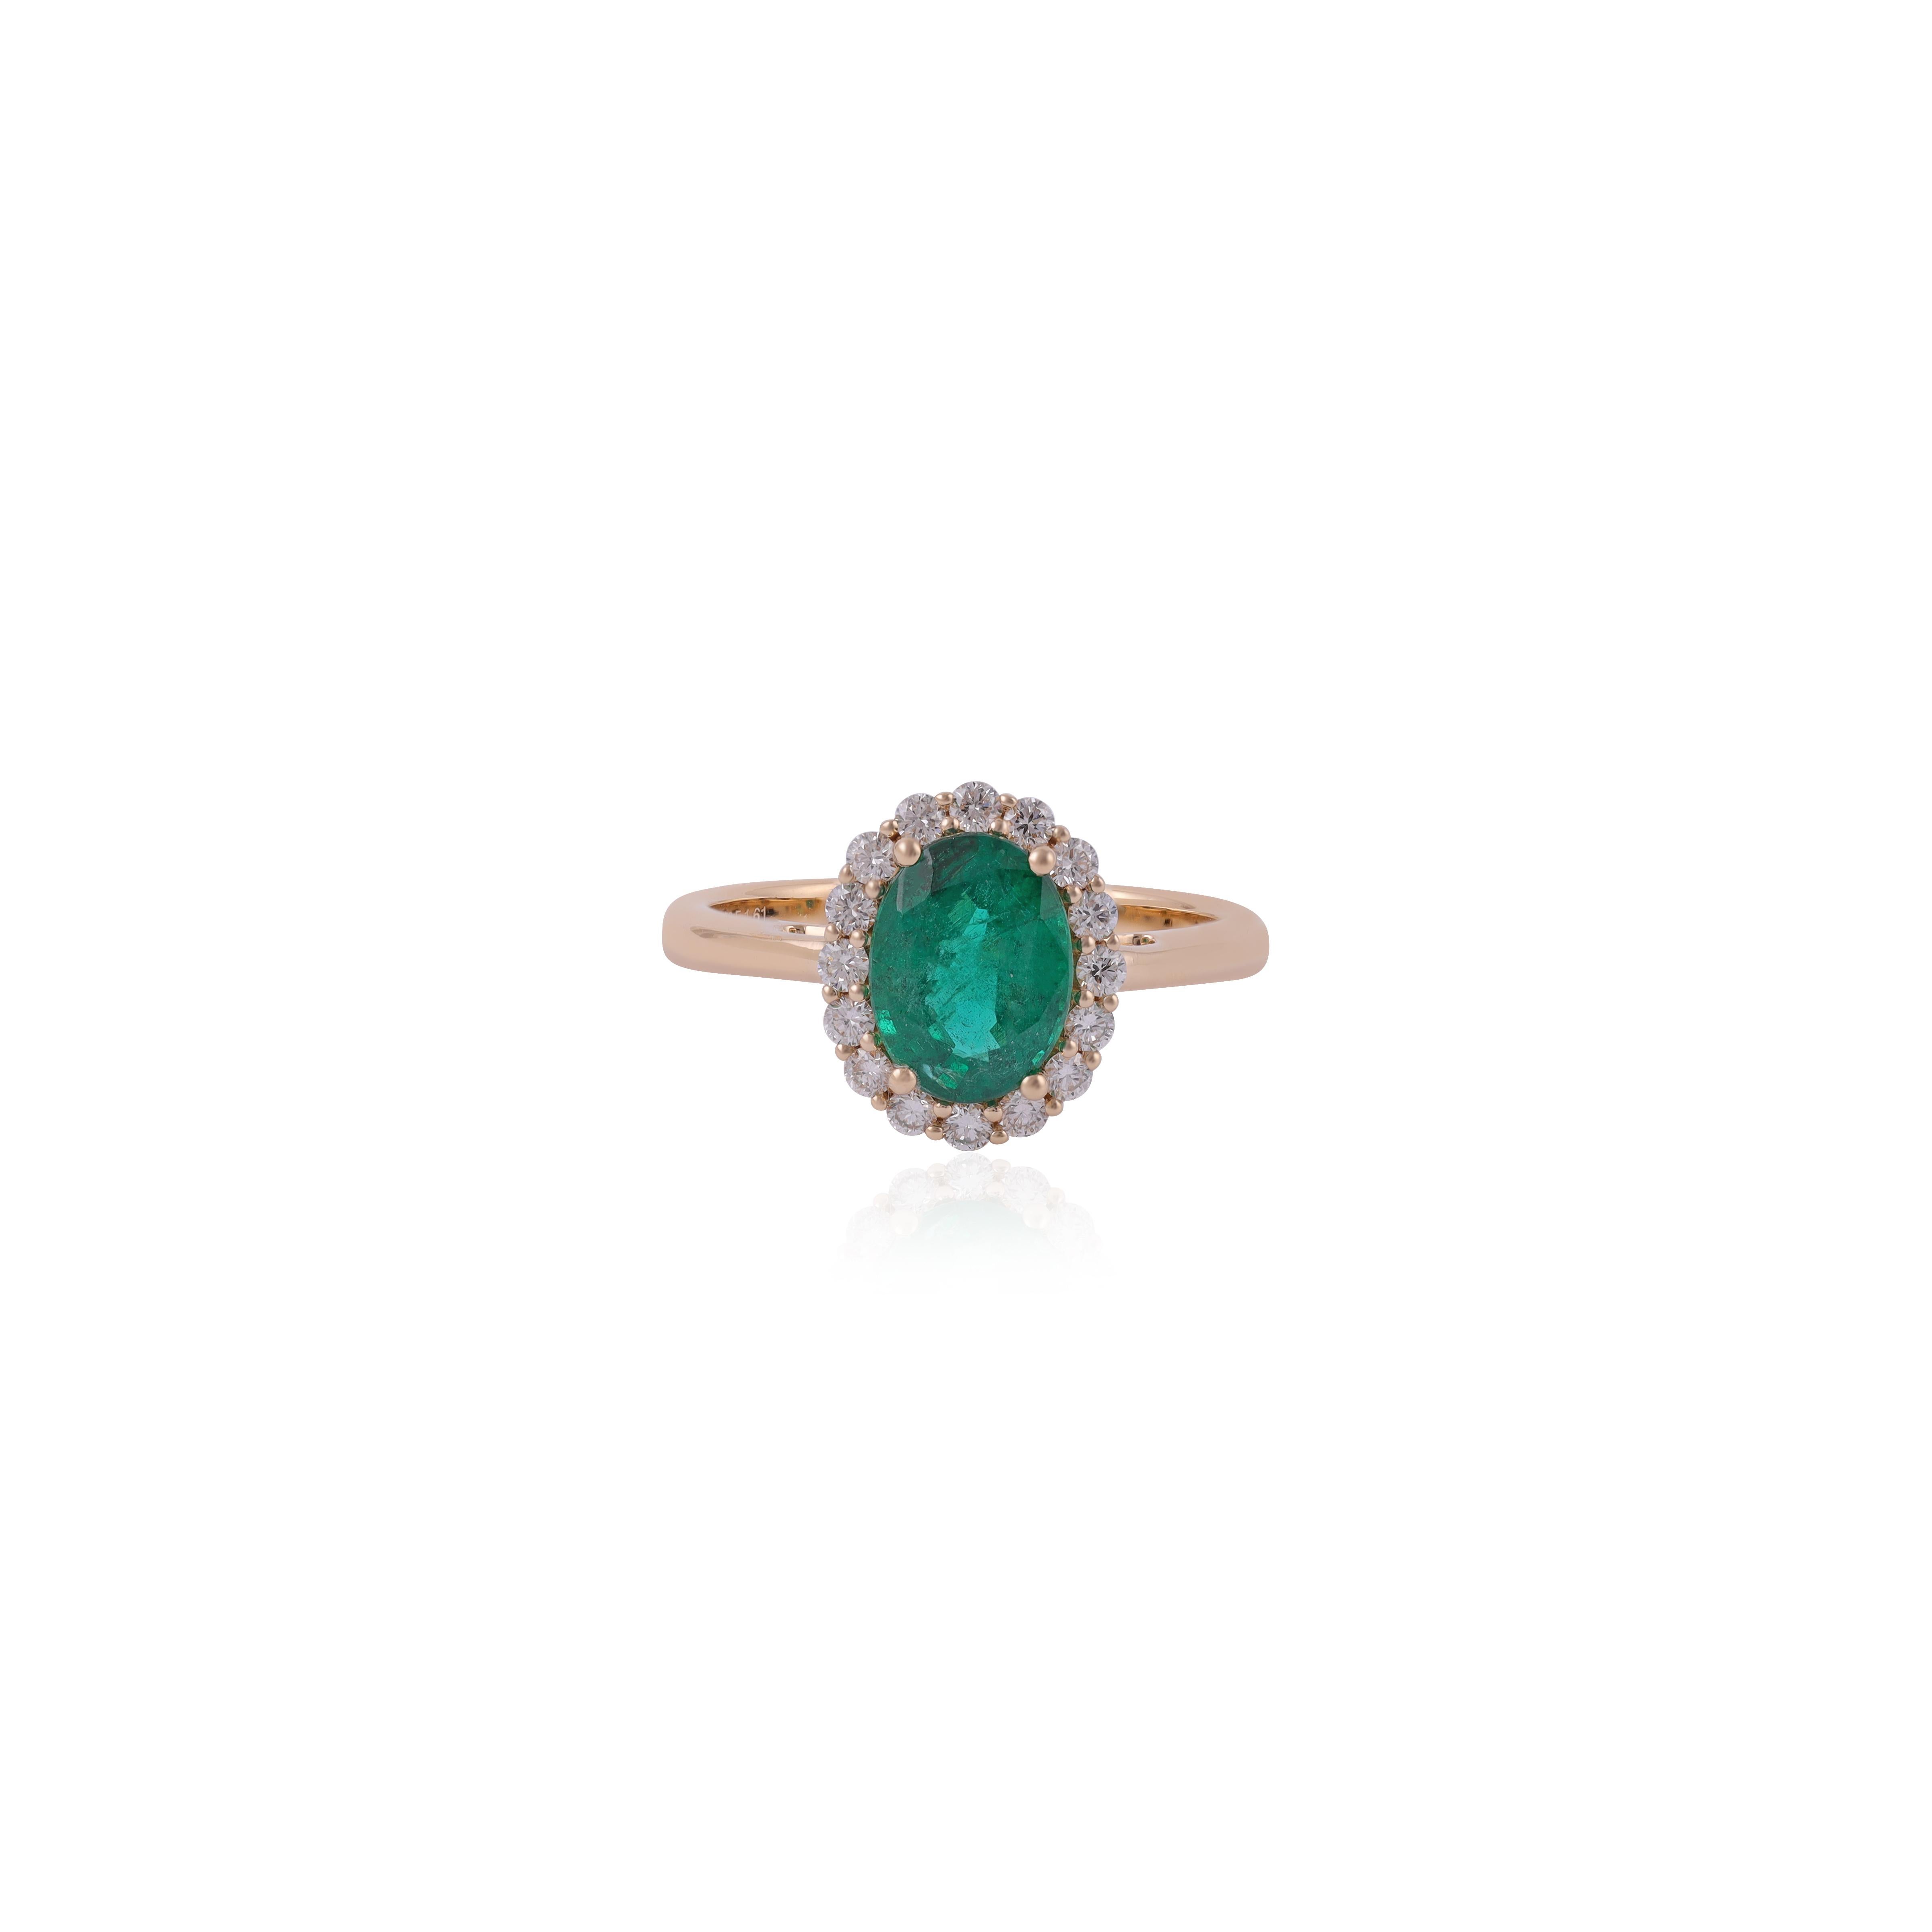 This is an elegant emerald & diamond ring studded in 18k Yellow gold with 1 piece of oval Cut  shaped Zambian emerald weight 1.61 carat which is surrounded by 16 pieces of round shaped diamonds weight 0.32 carat, this entire ring studded in 18k